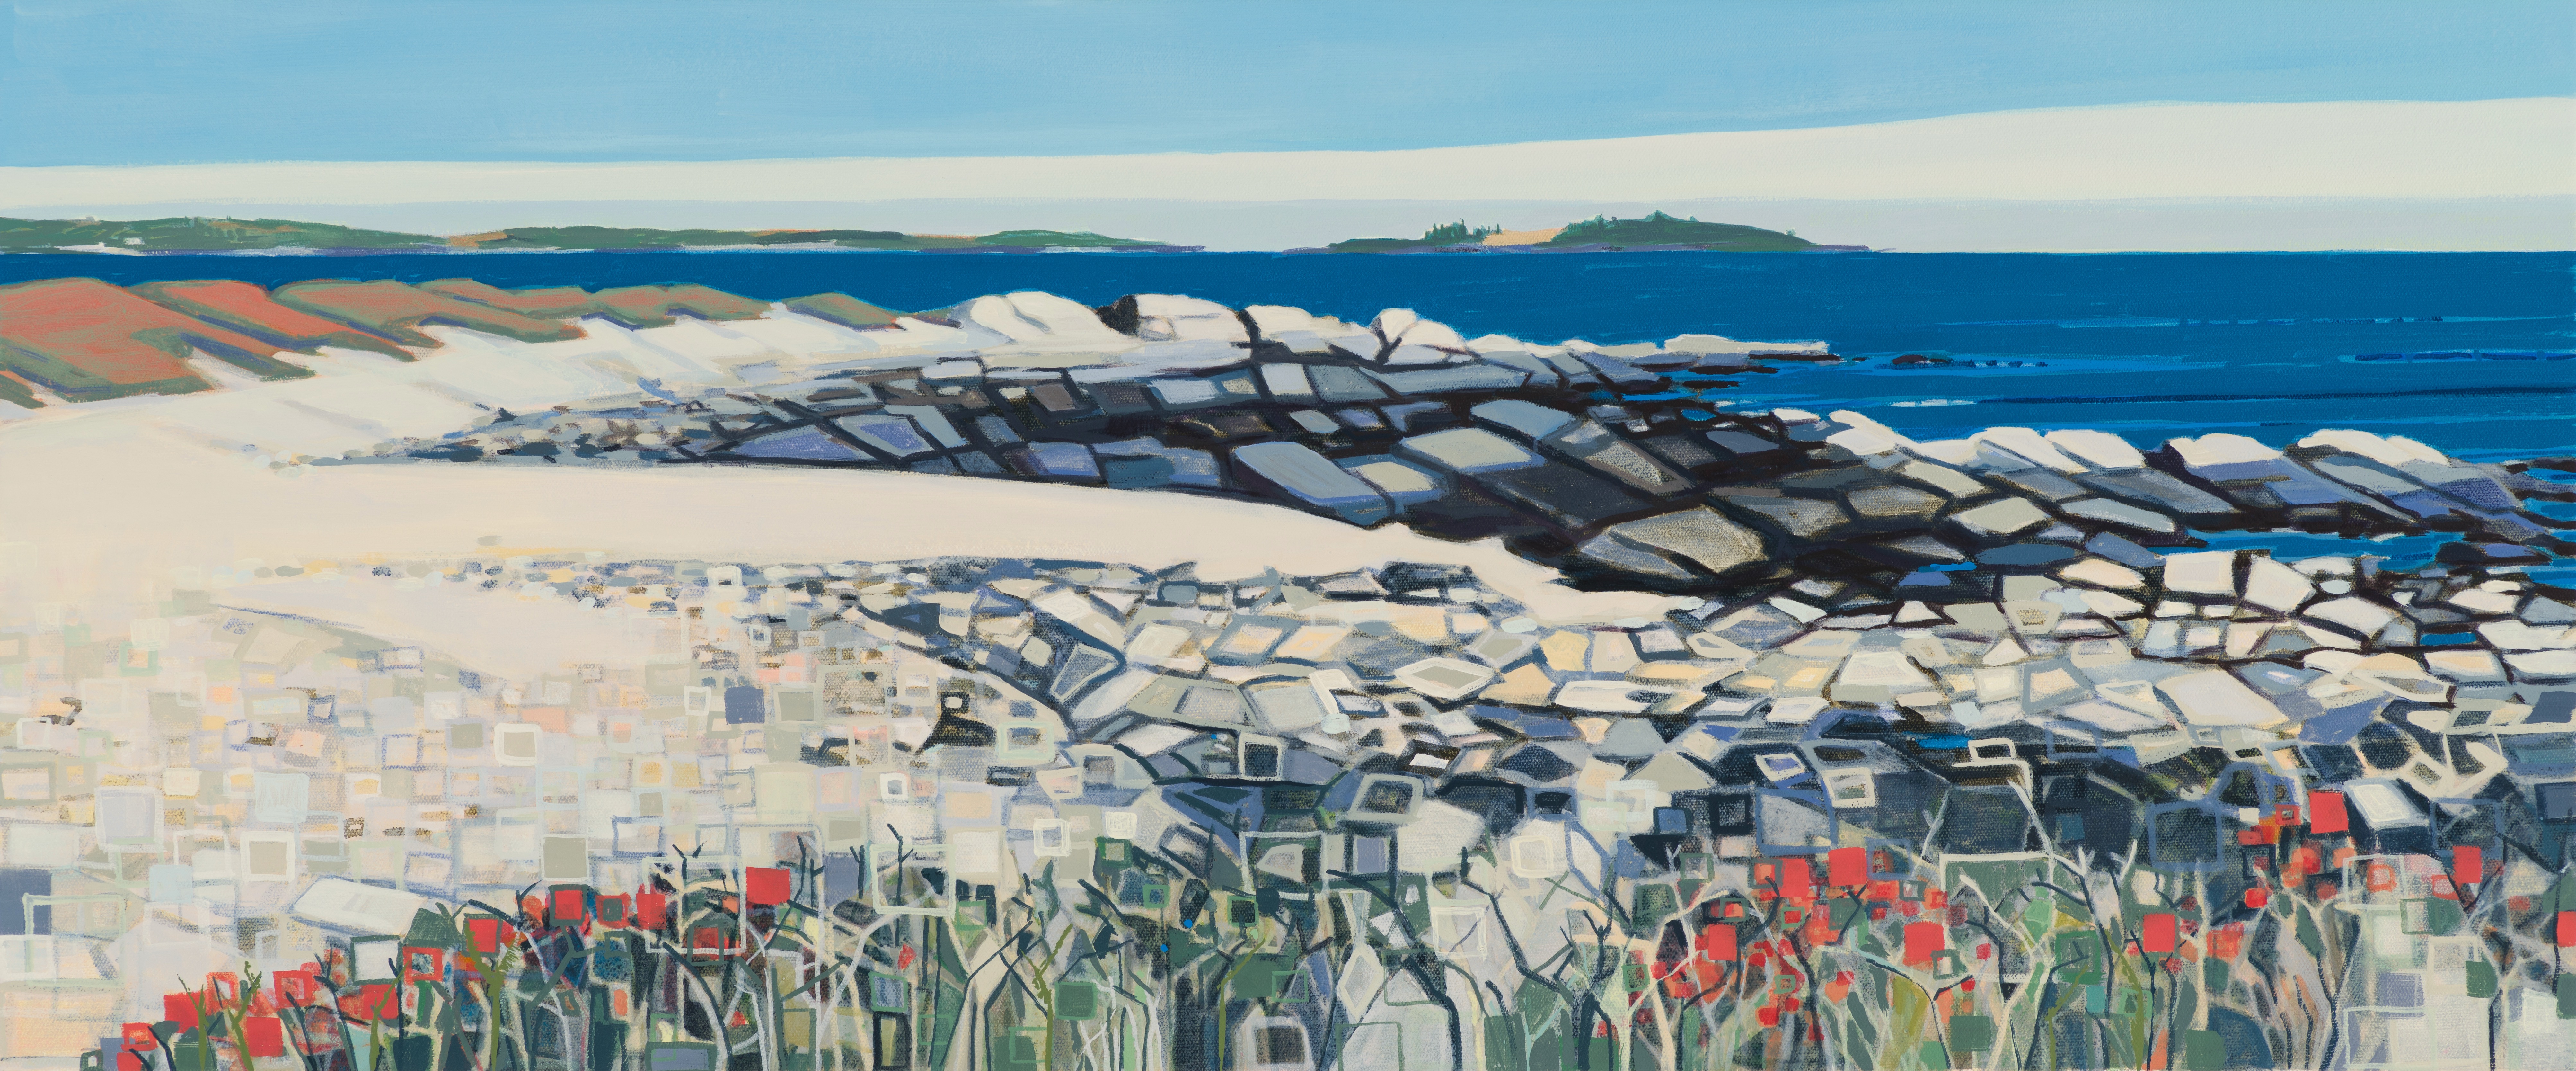 South Cove, 10/11/20, 14:55, 43.528283, -70.311683, 2021, oil on canvas, 15 x 36 inches